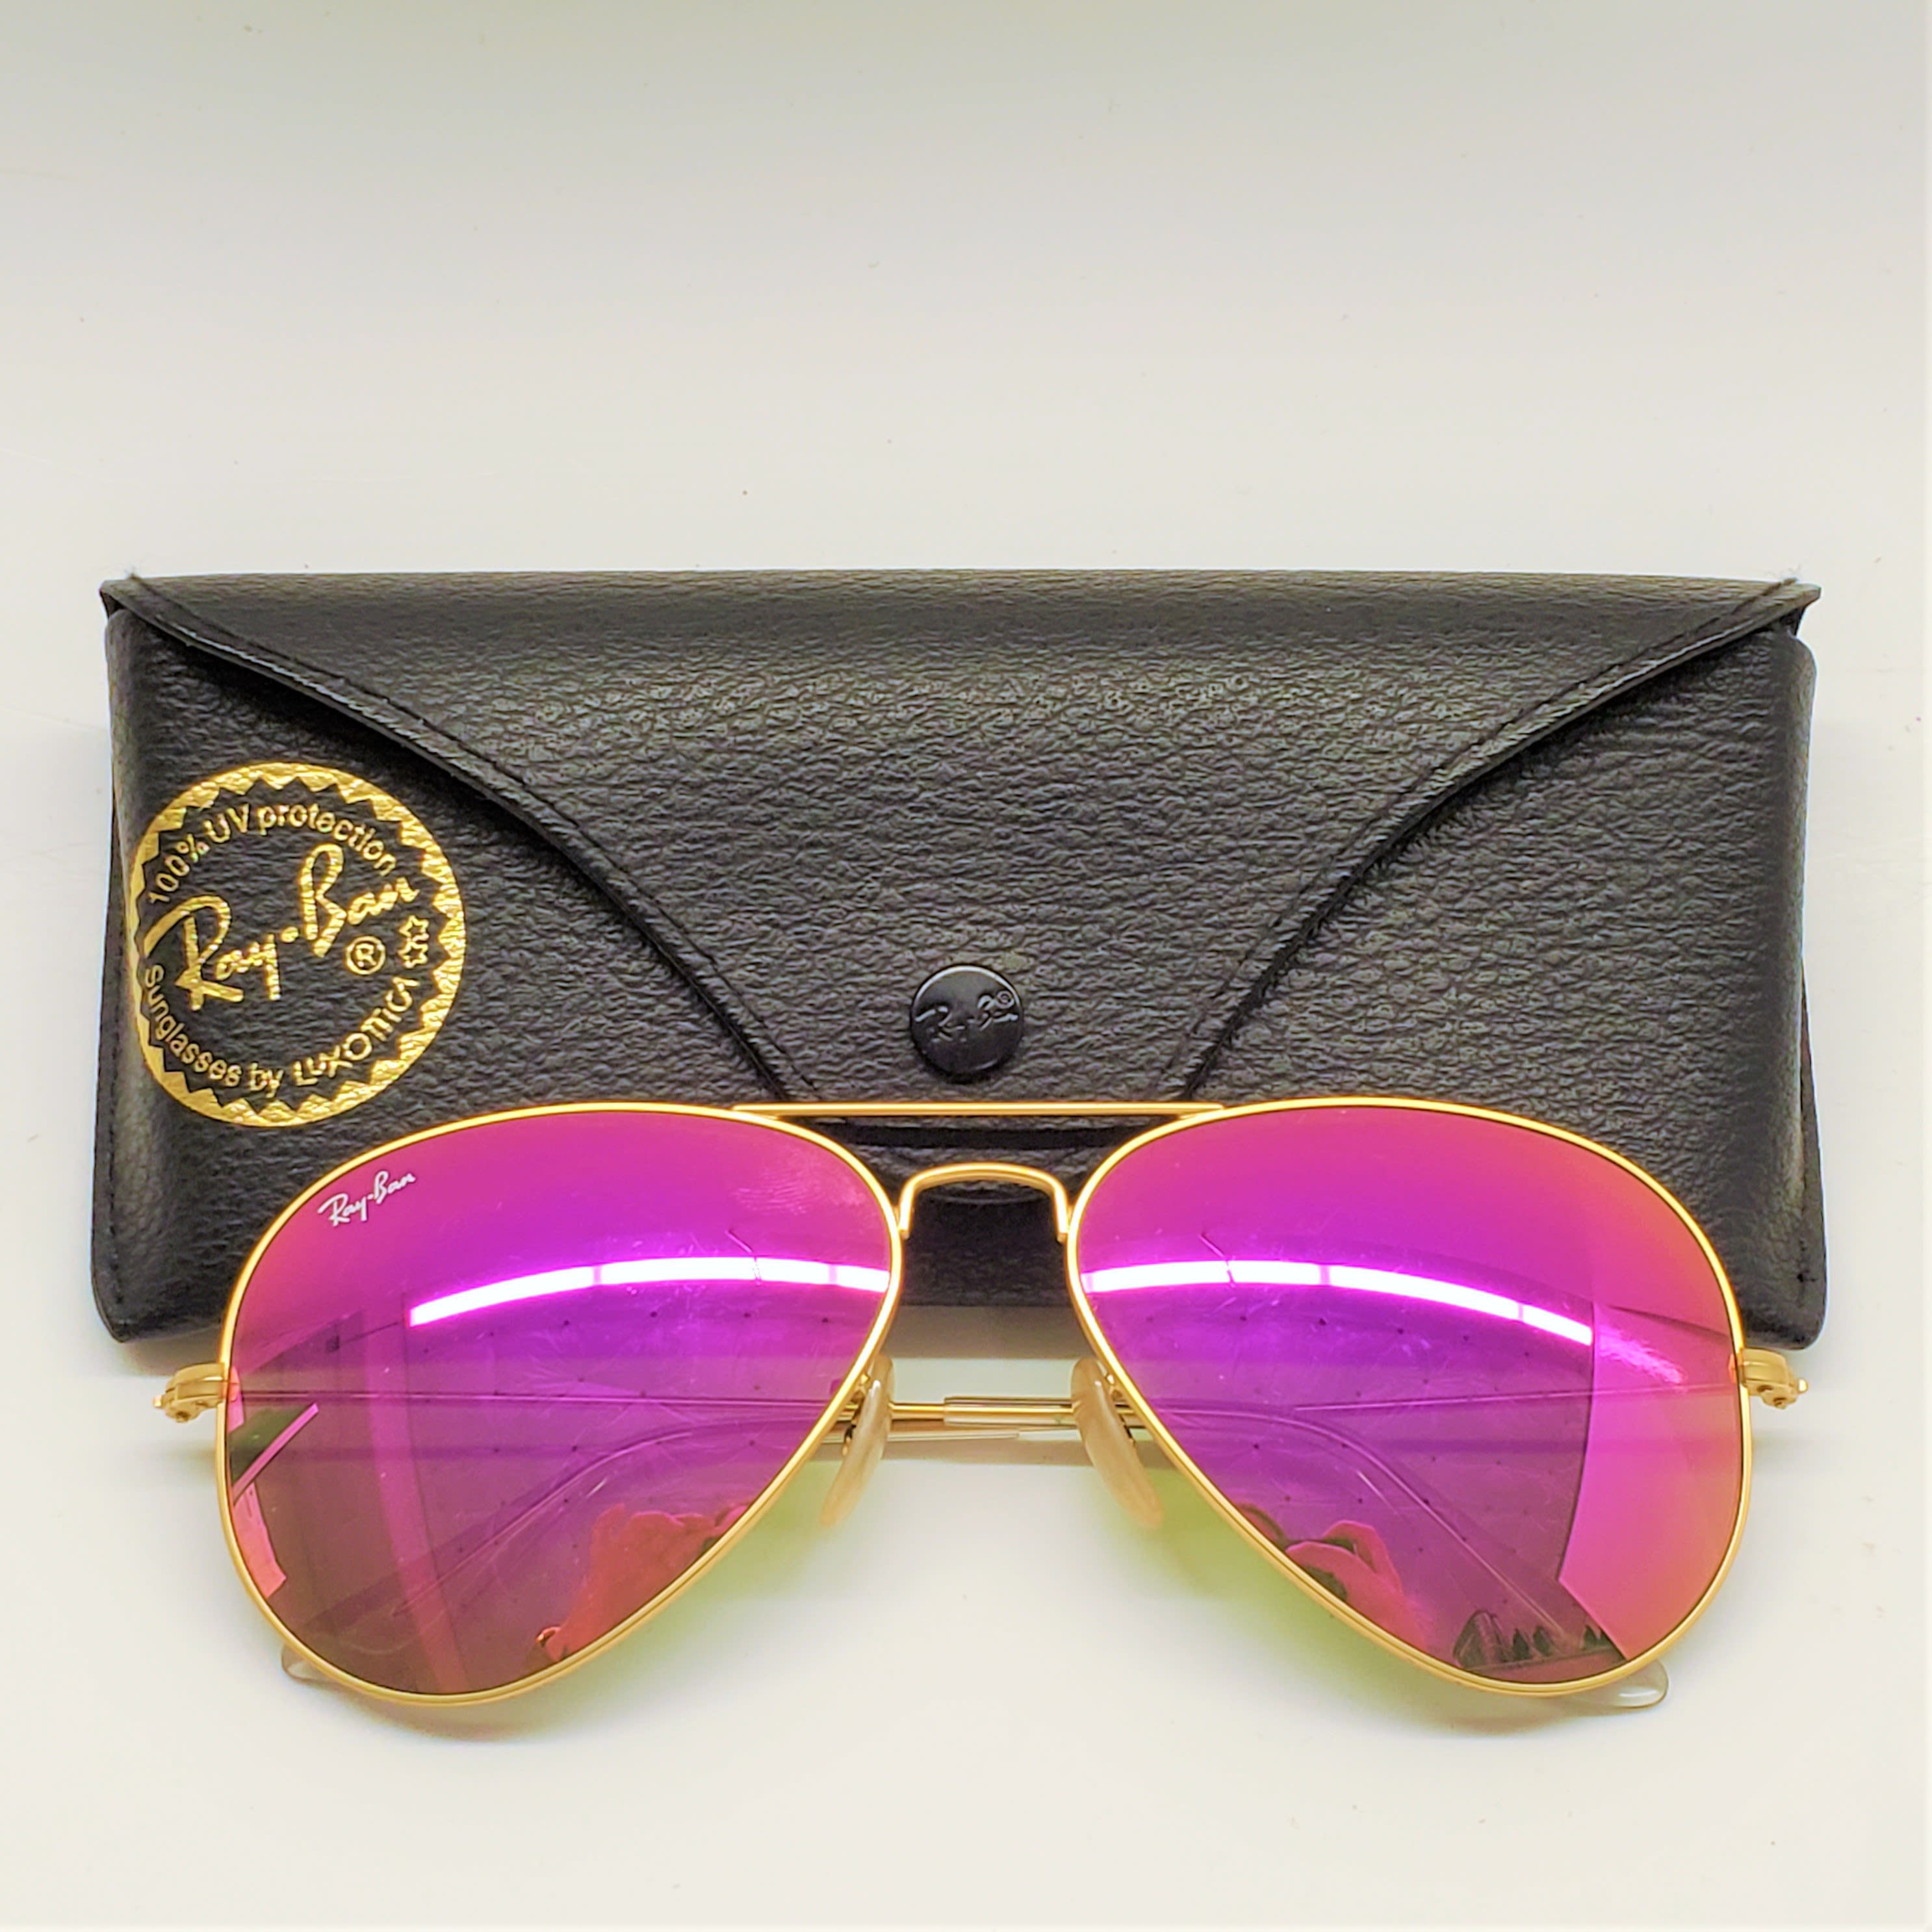 Buy the Ray-Ban RB3025 Classic Aviator Flash Sunglasses w/ Case